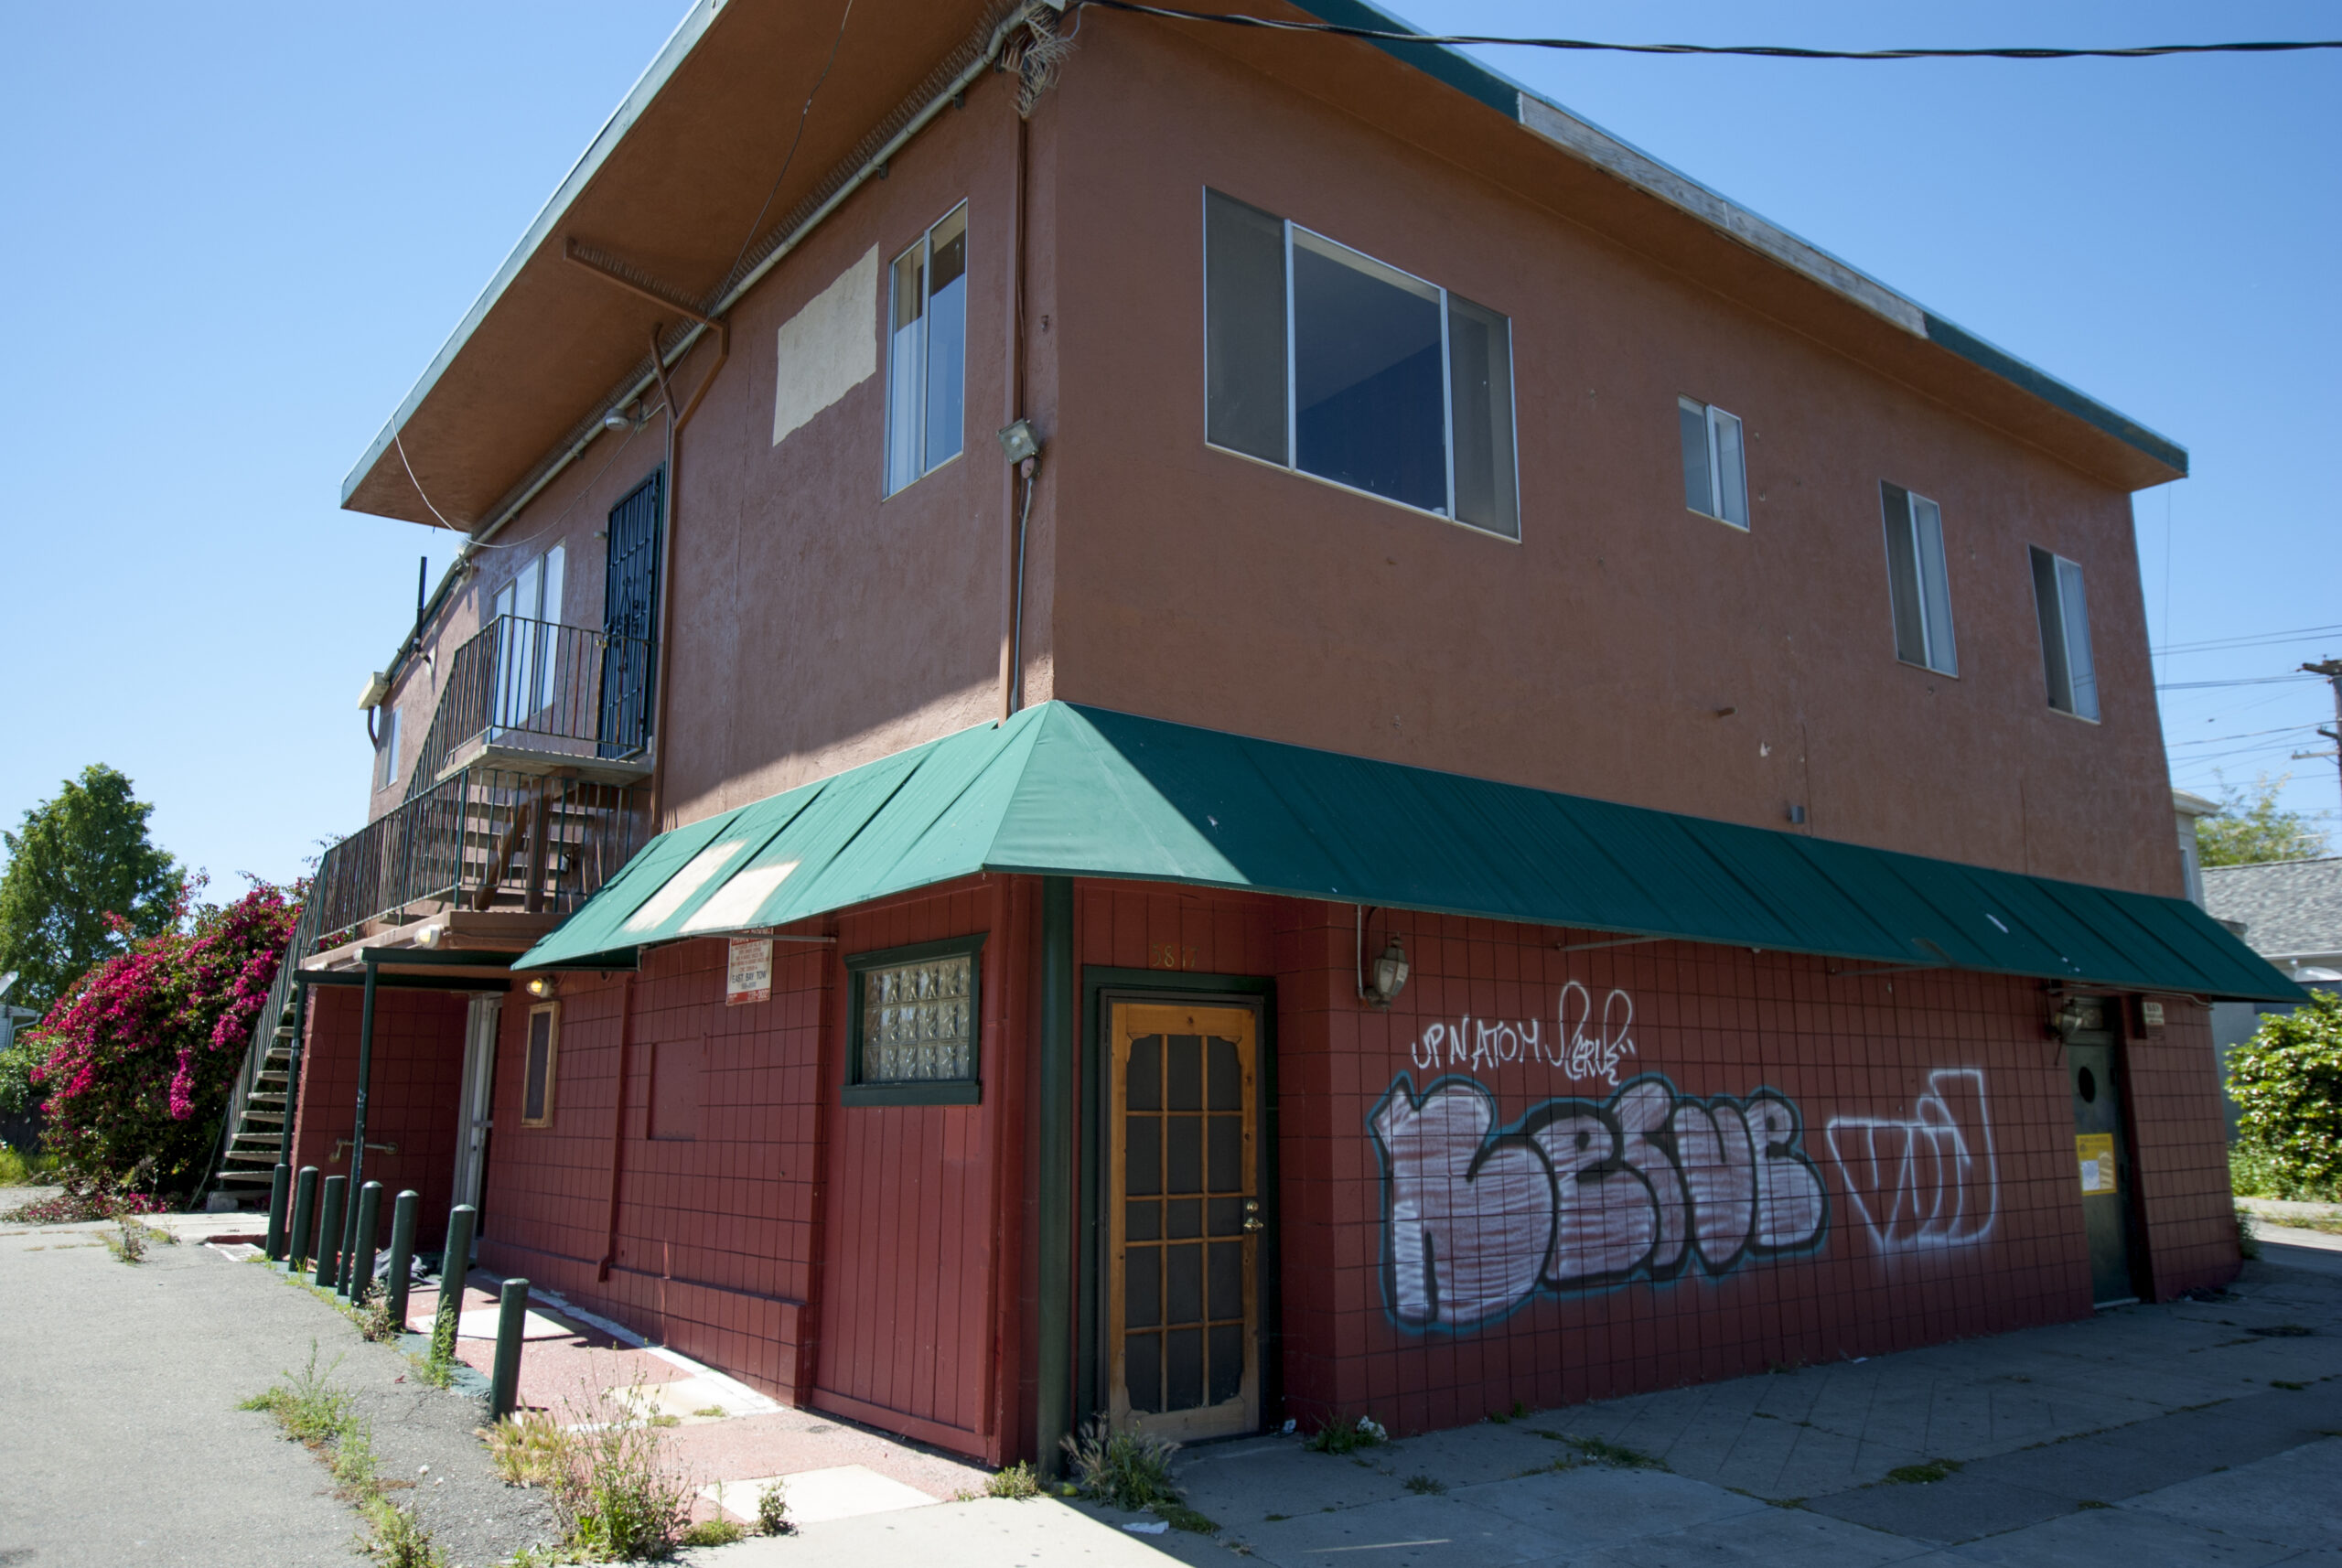 Former site of Dorsey's Locker, a soul food restaurant and music venue that closed in 2015 after operating for 74 years in Oakland, California.